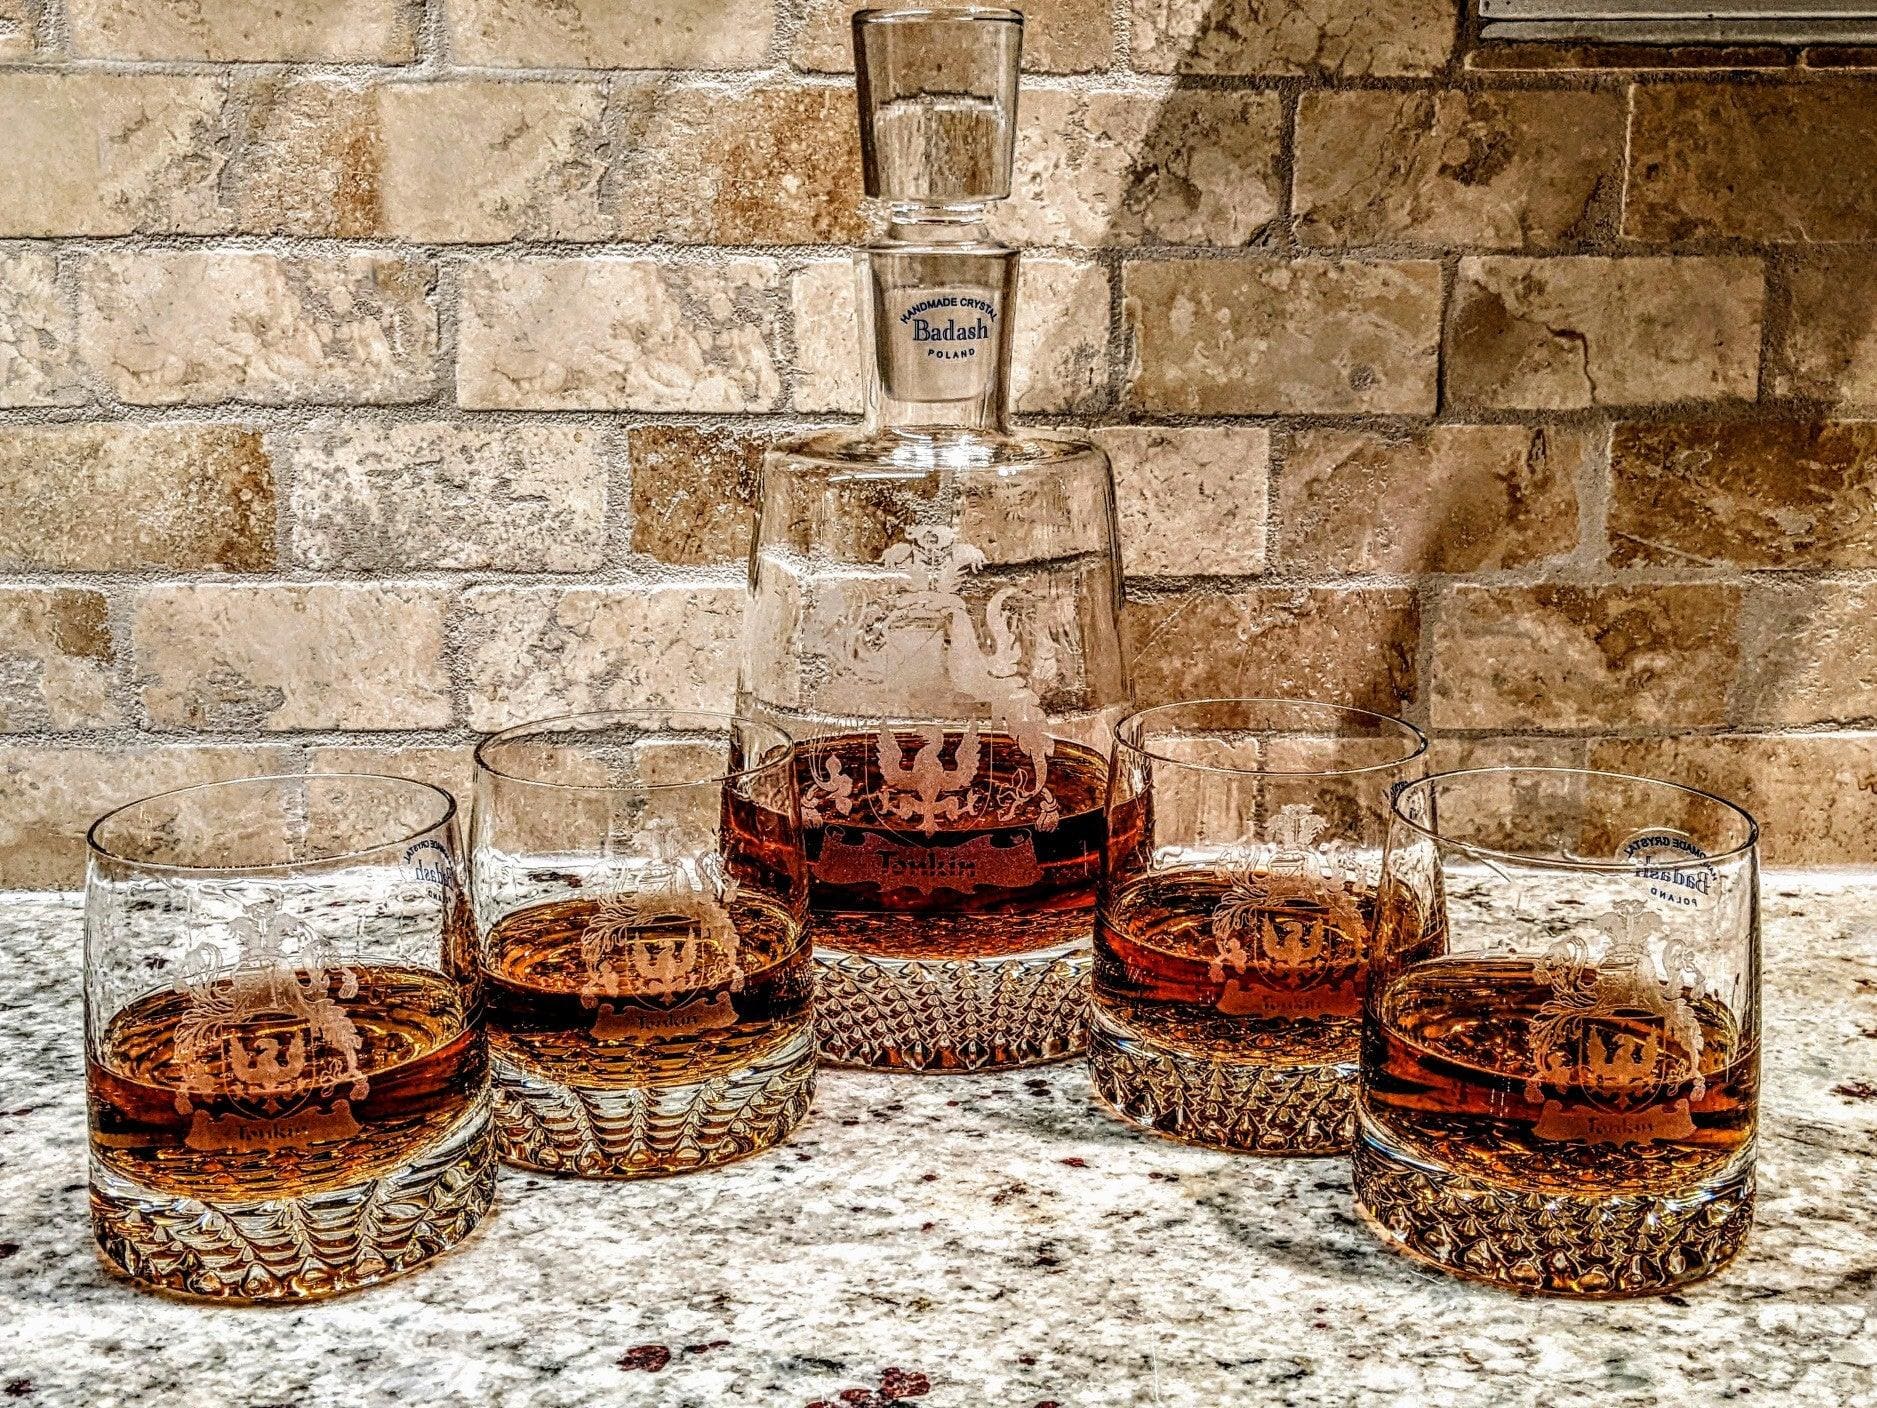 5 Piece Engraved Park Avenue Whiskey, Bourbon or Scotch Decanter Personalized Set - Barware Hub - Barware Swag and Etched Gifts